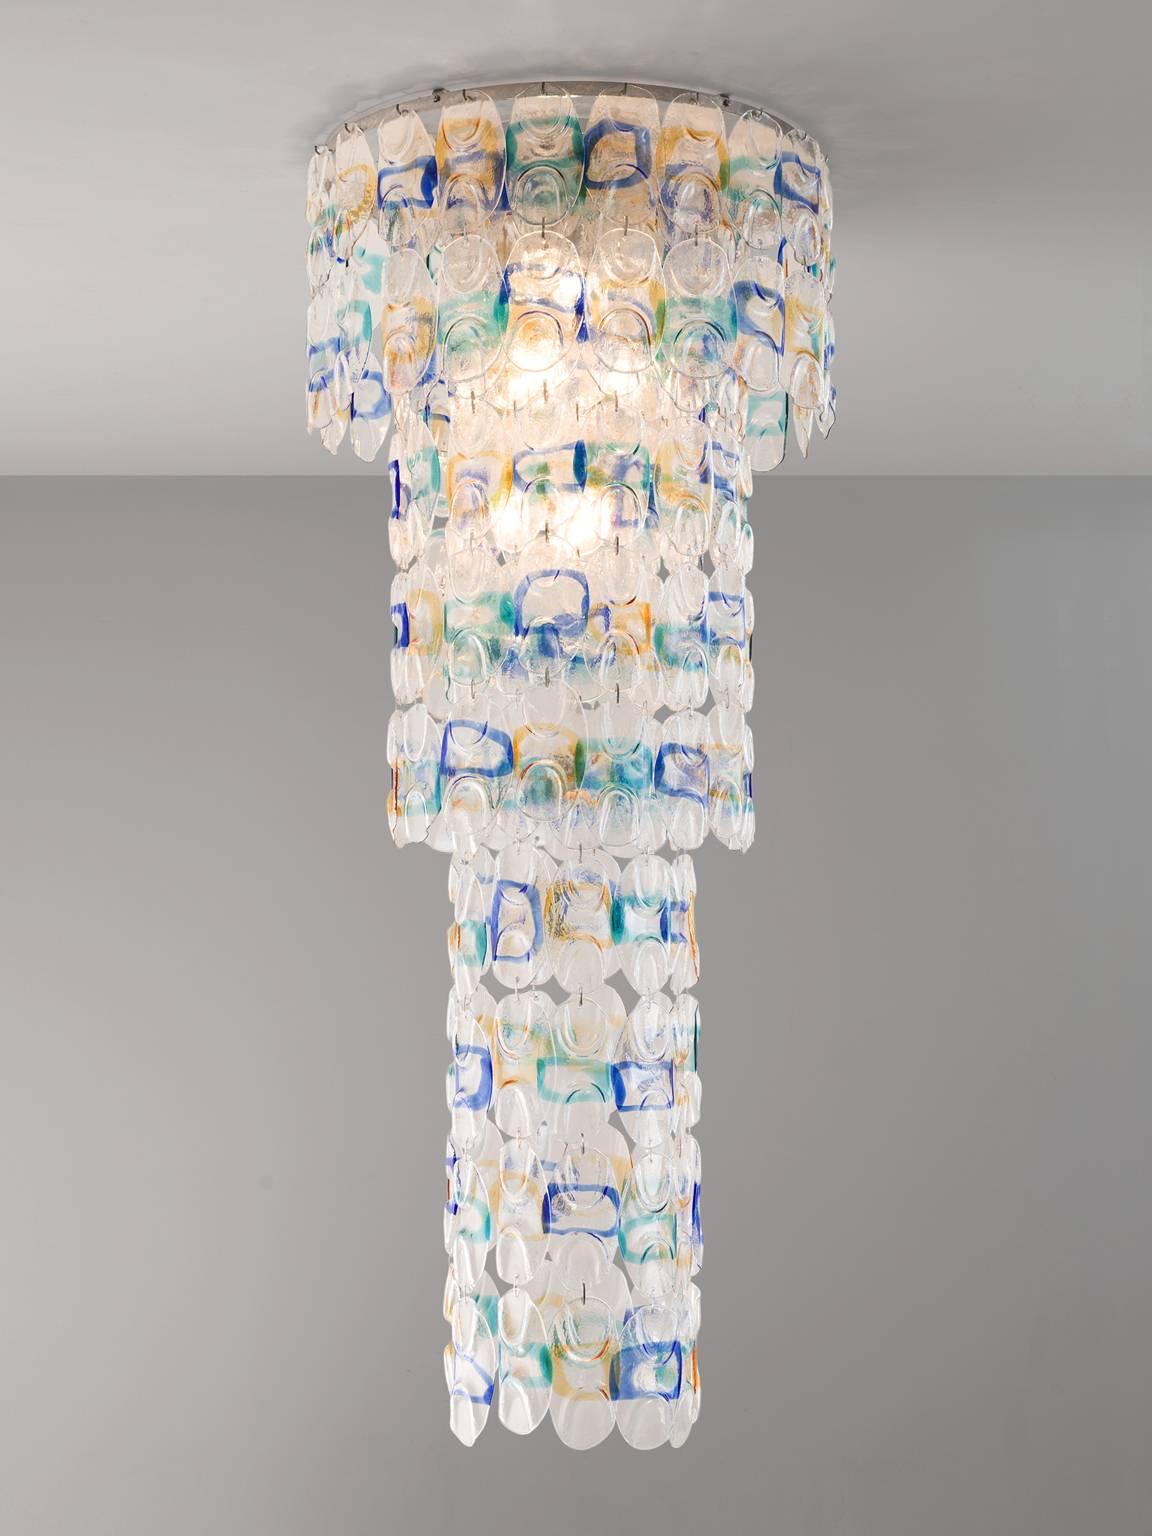 Chandelier in glass and metal for Venini, Italy, 1960s.

Stunning pair of two extra large (7.5 feet) Venini chandeliers with Murano glass. Each chandelier consist of 218 glass discs. Clear glass with a colored 'circle' on it. The glass is divided